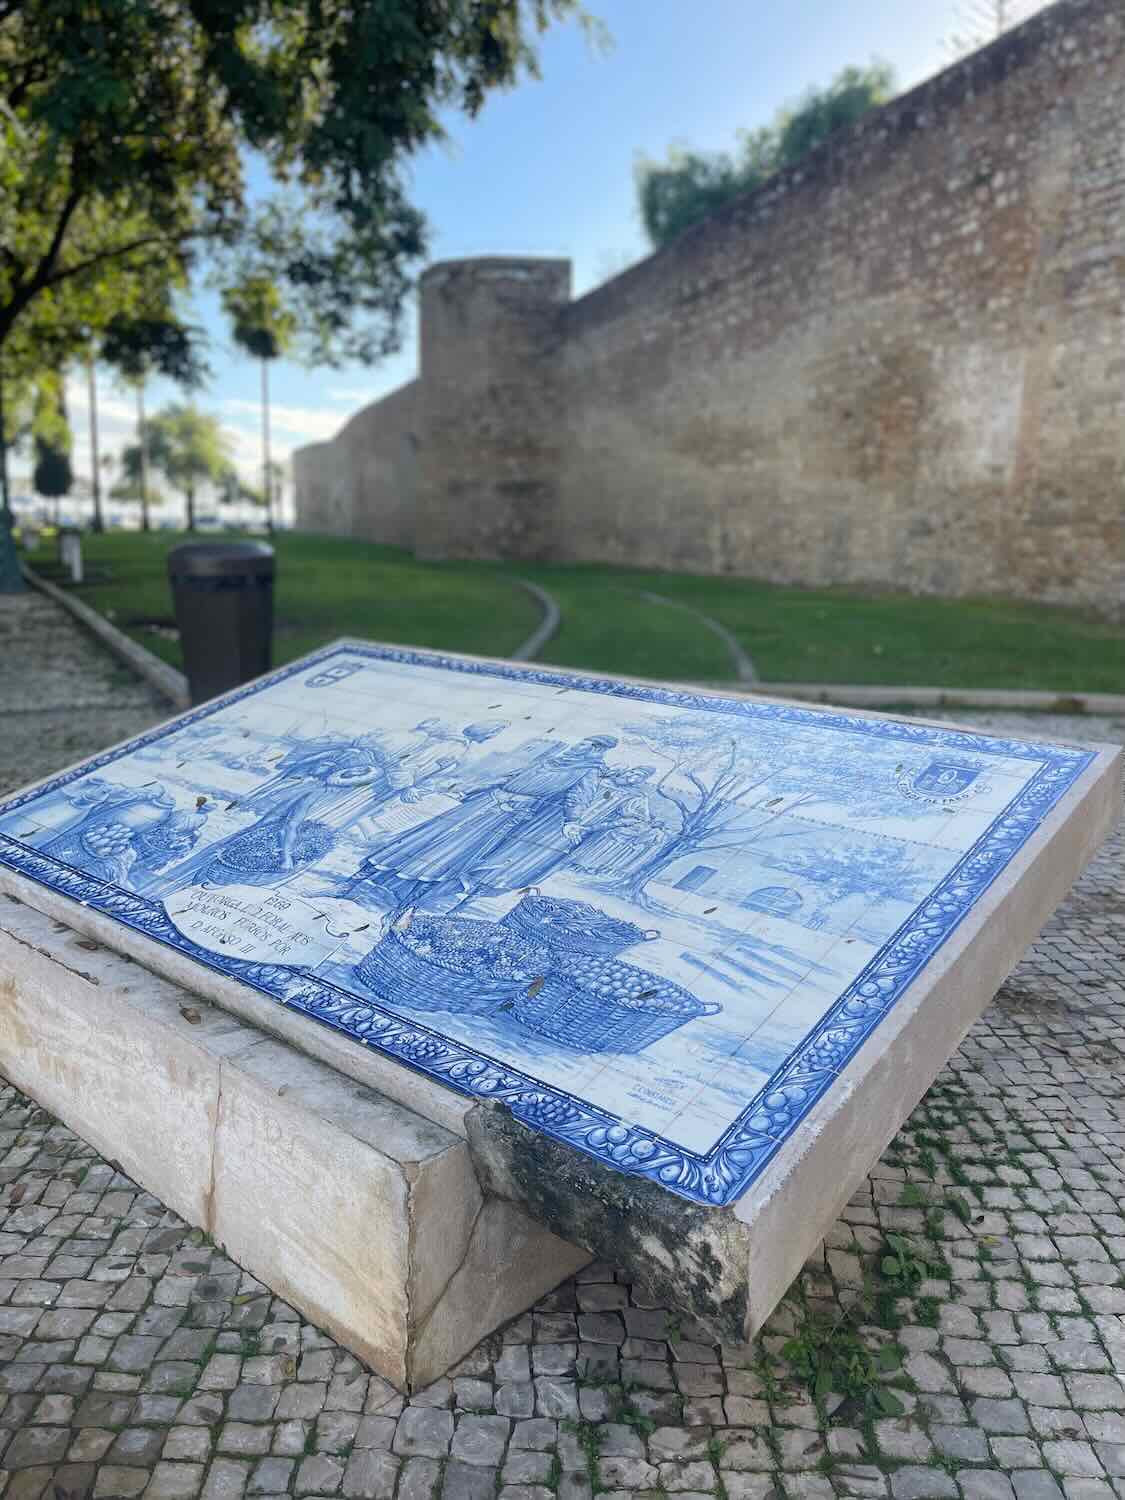 An ornate blue and white ceramic tile mural depicting historical scenes, set on a stone bench with Faro's ancient city wall in the background and a clear blue sky overhead.